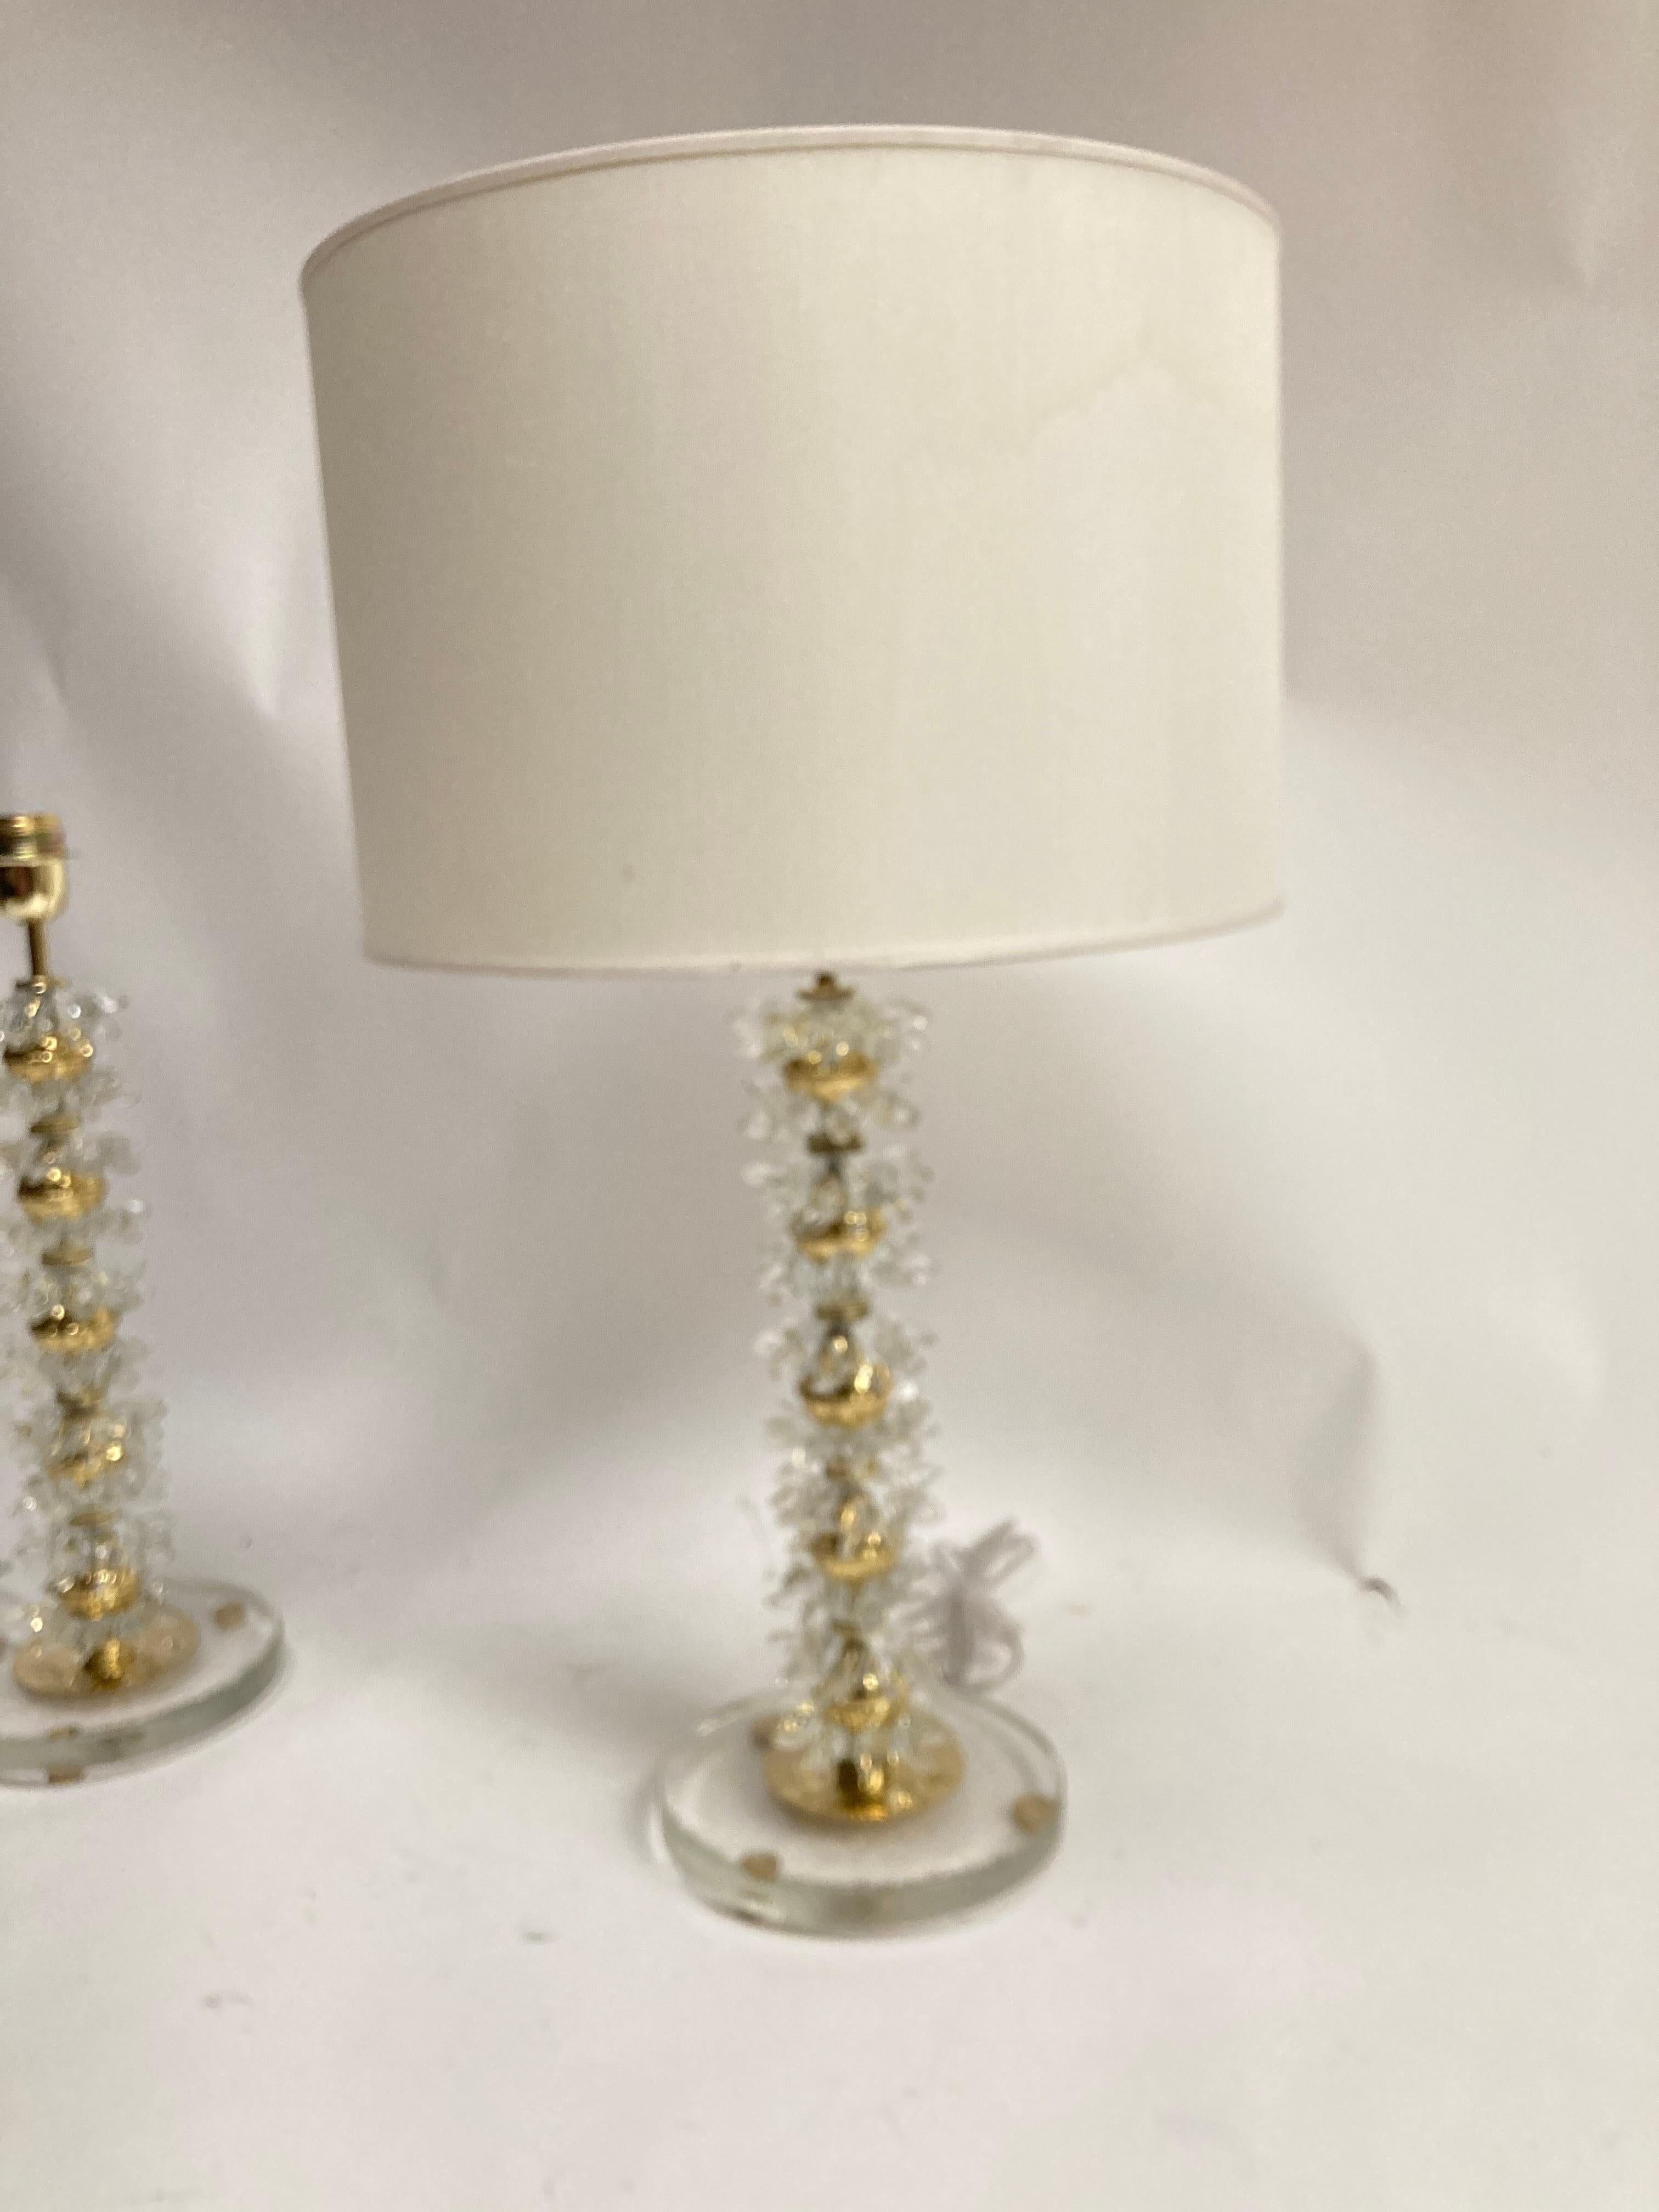 Unusual pair of Murano glass lamps with brass balls
Italy 
1970's.